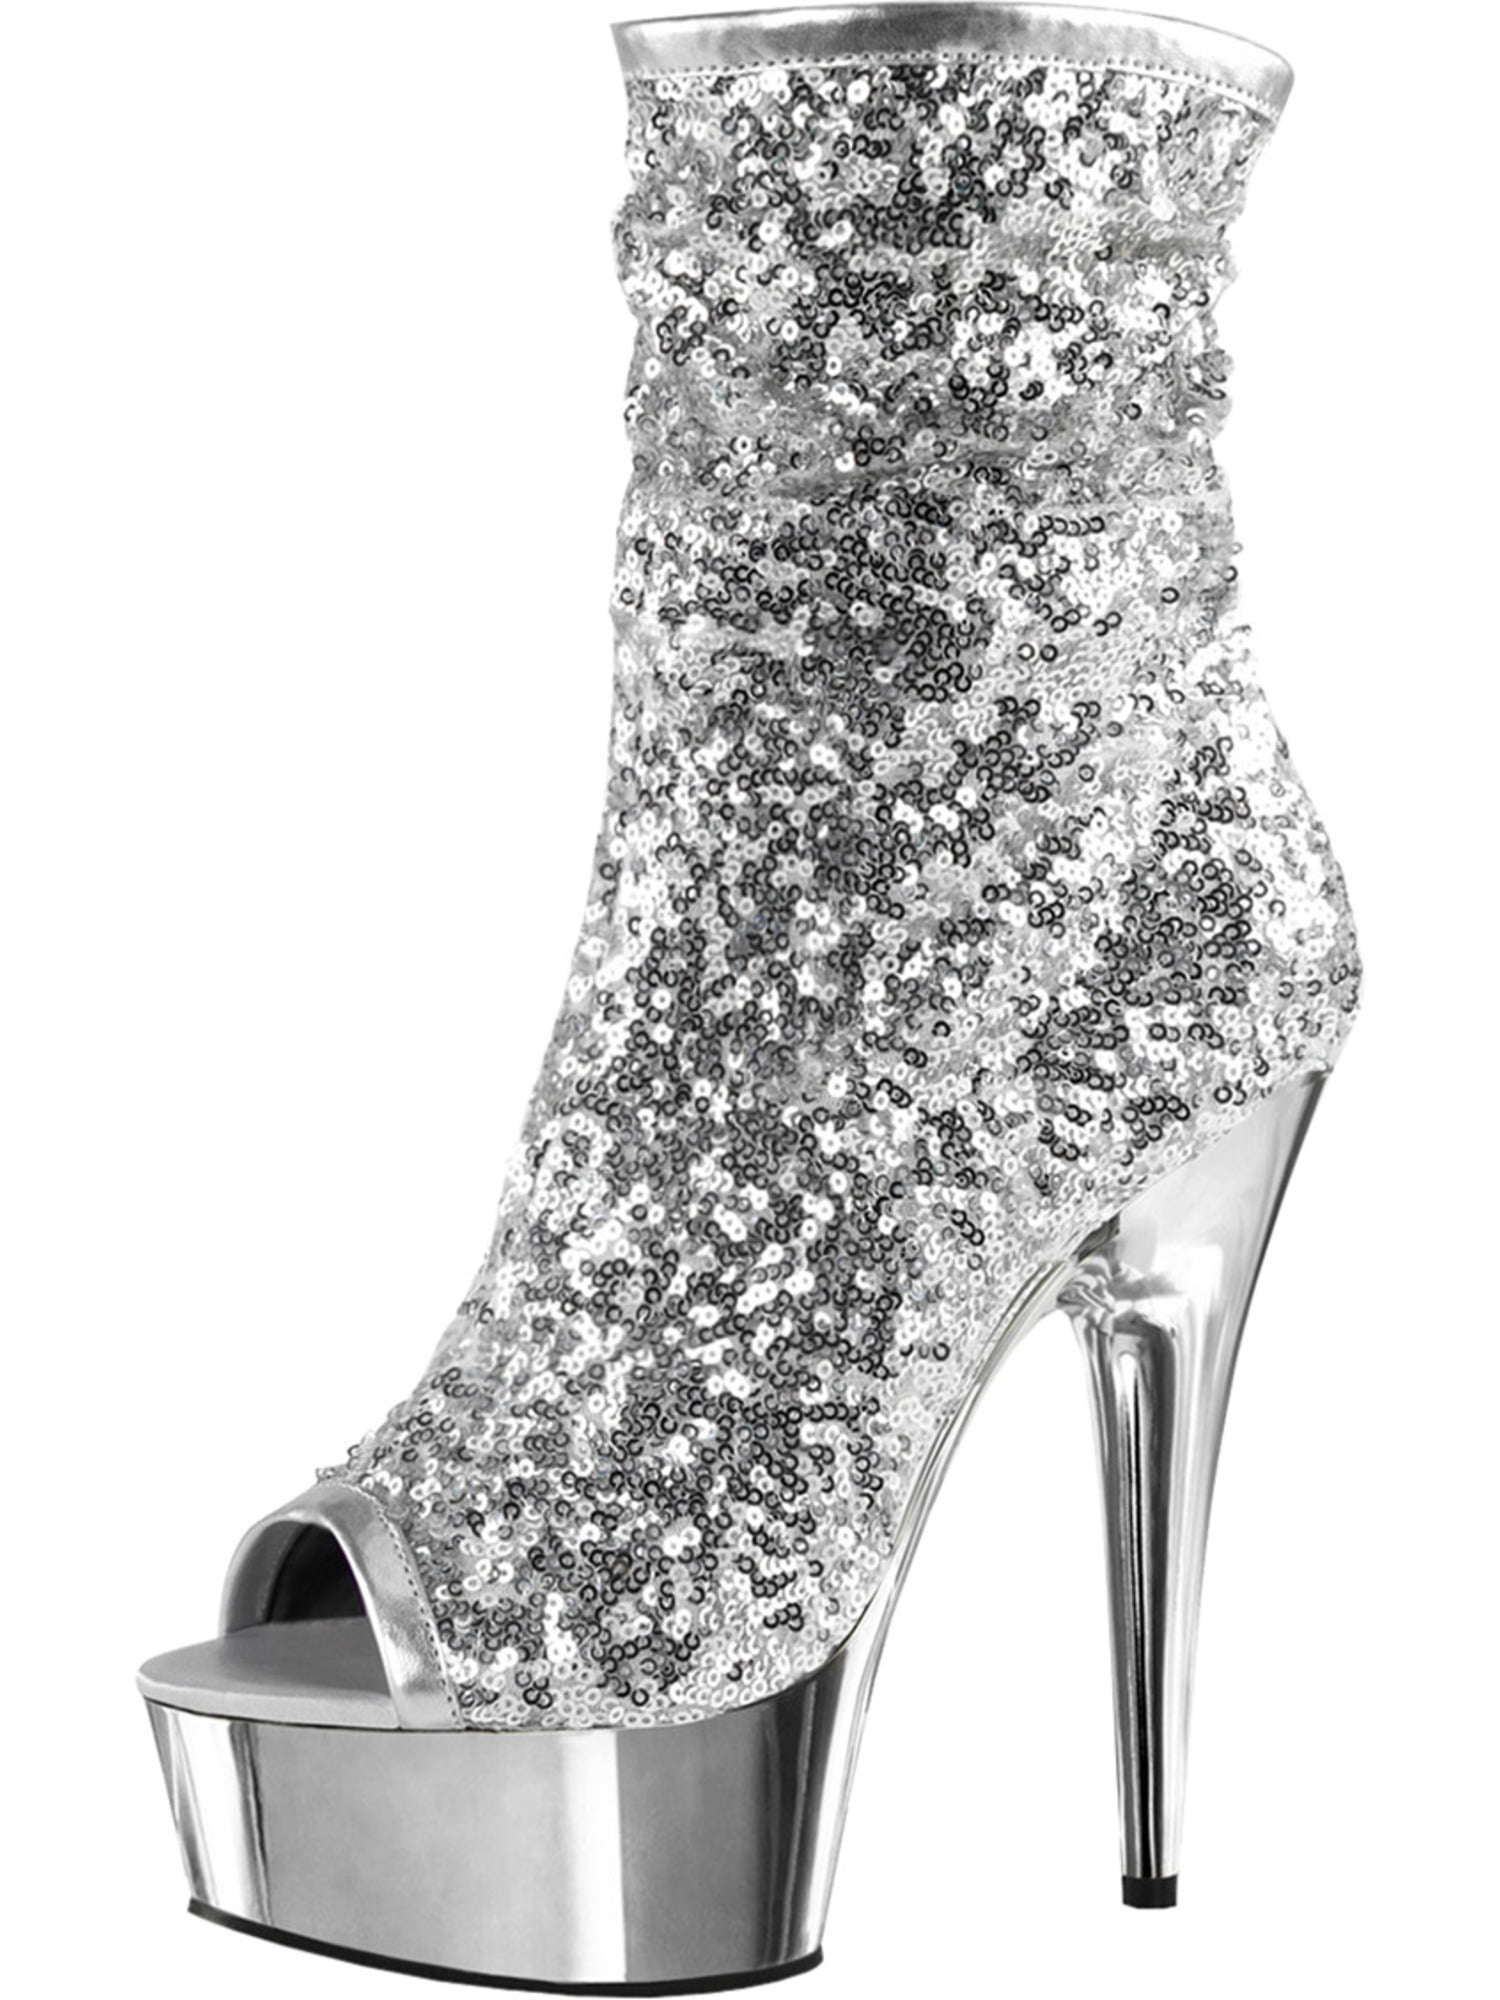 silver sparkly booties